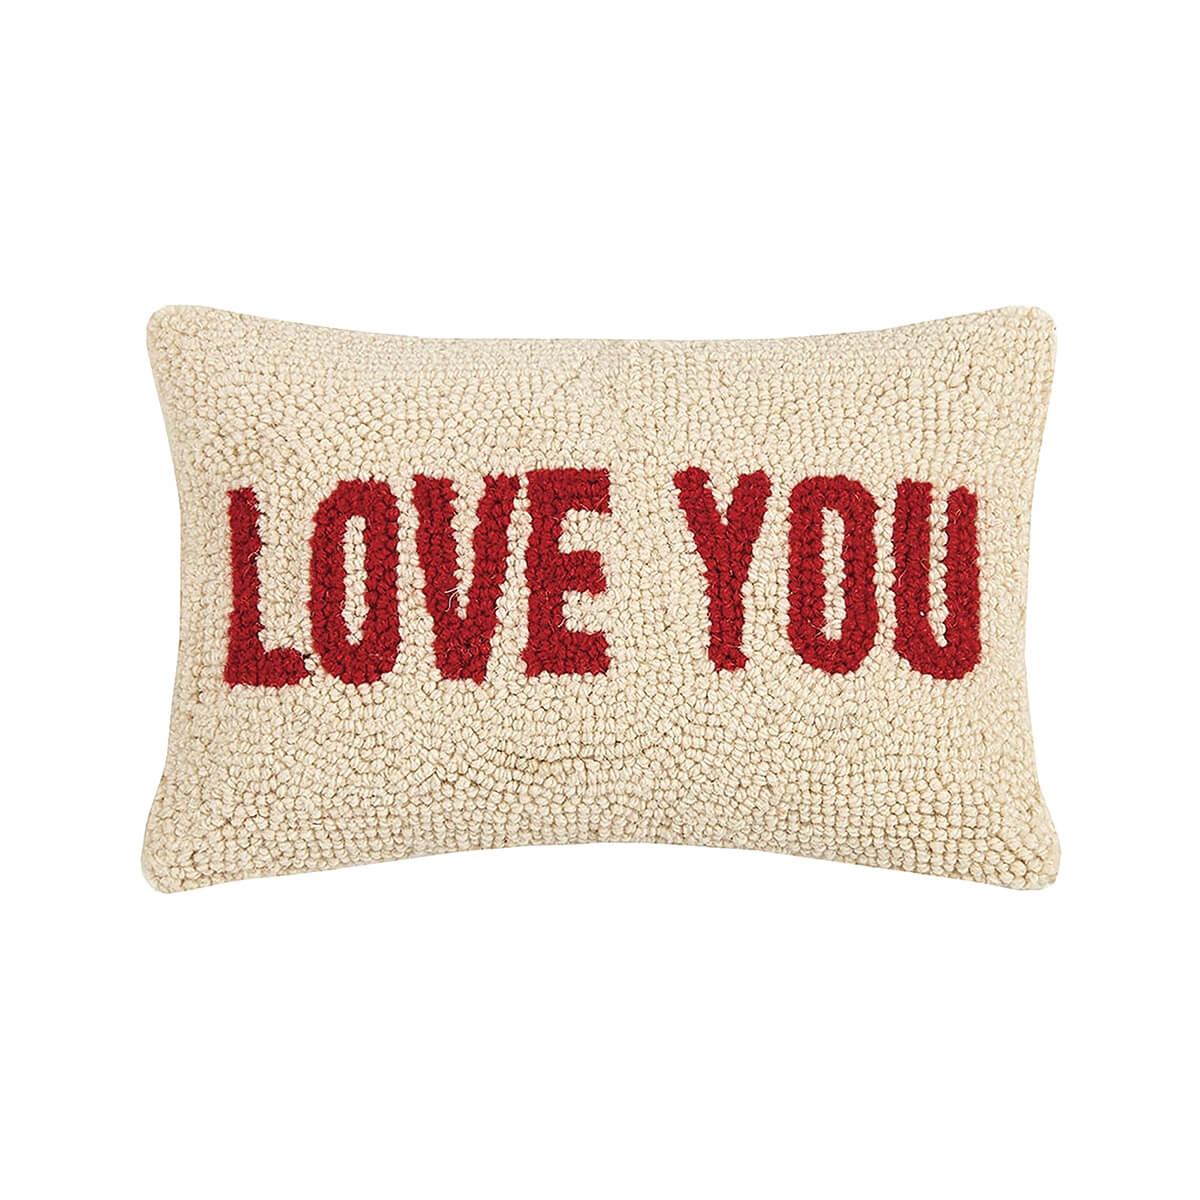 Peking Handicraft Live Love Camp Hook Pillow 18 by 18-Inch Multicolor